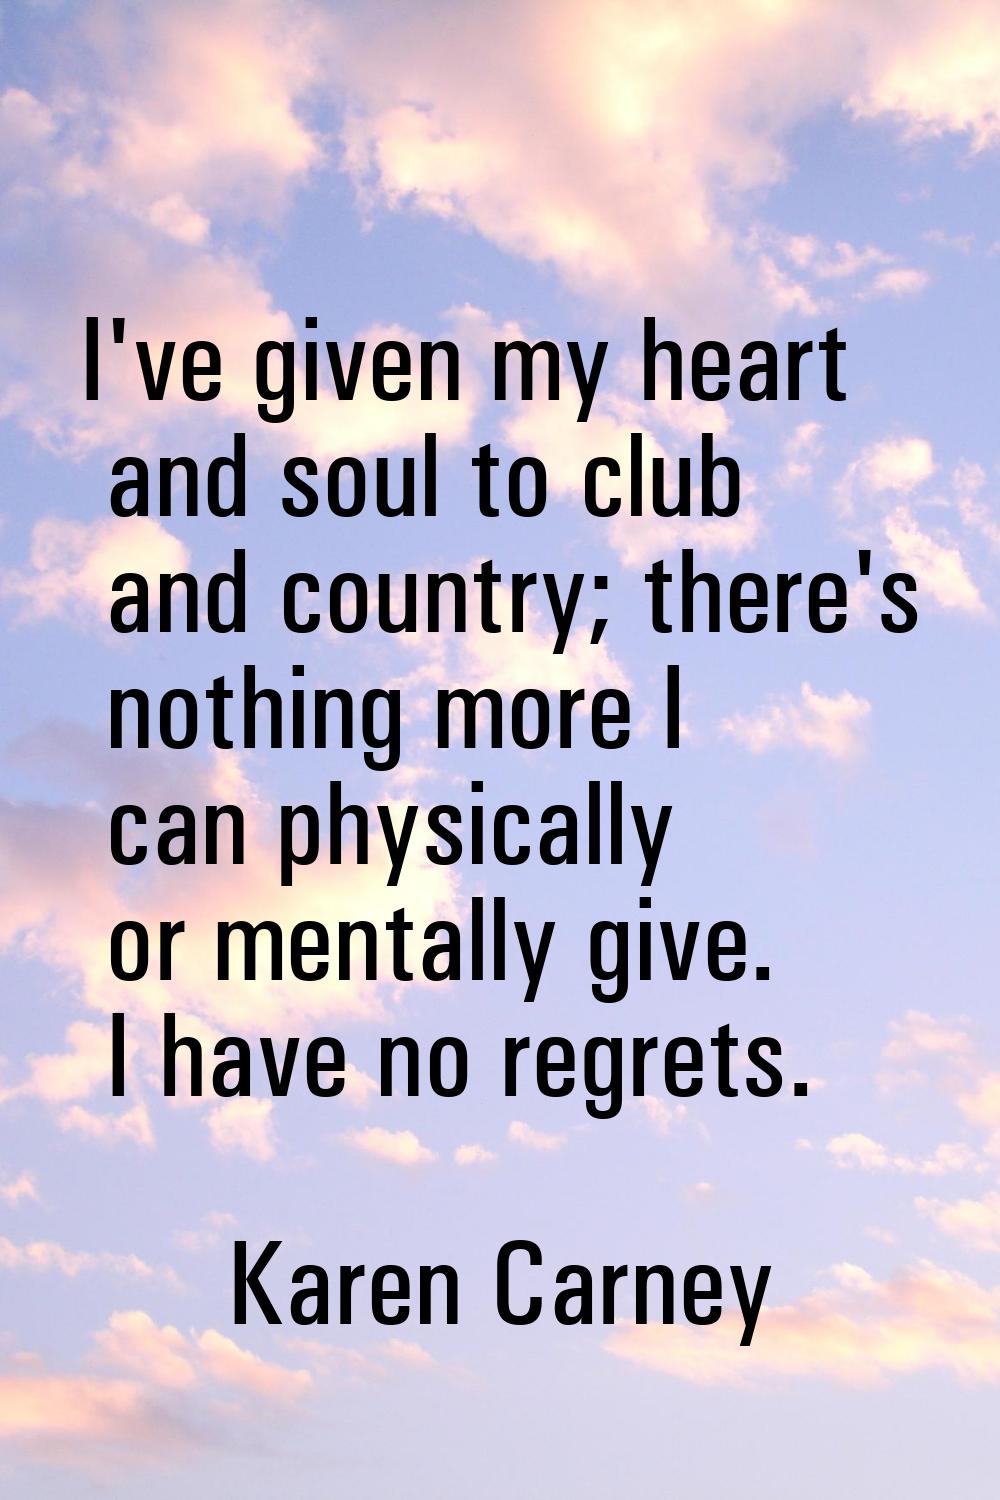 I've given my heart and soul to club and country; there's nothing more I can physically or mentally